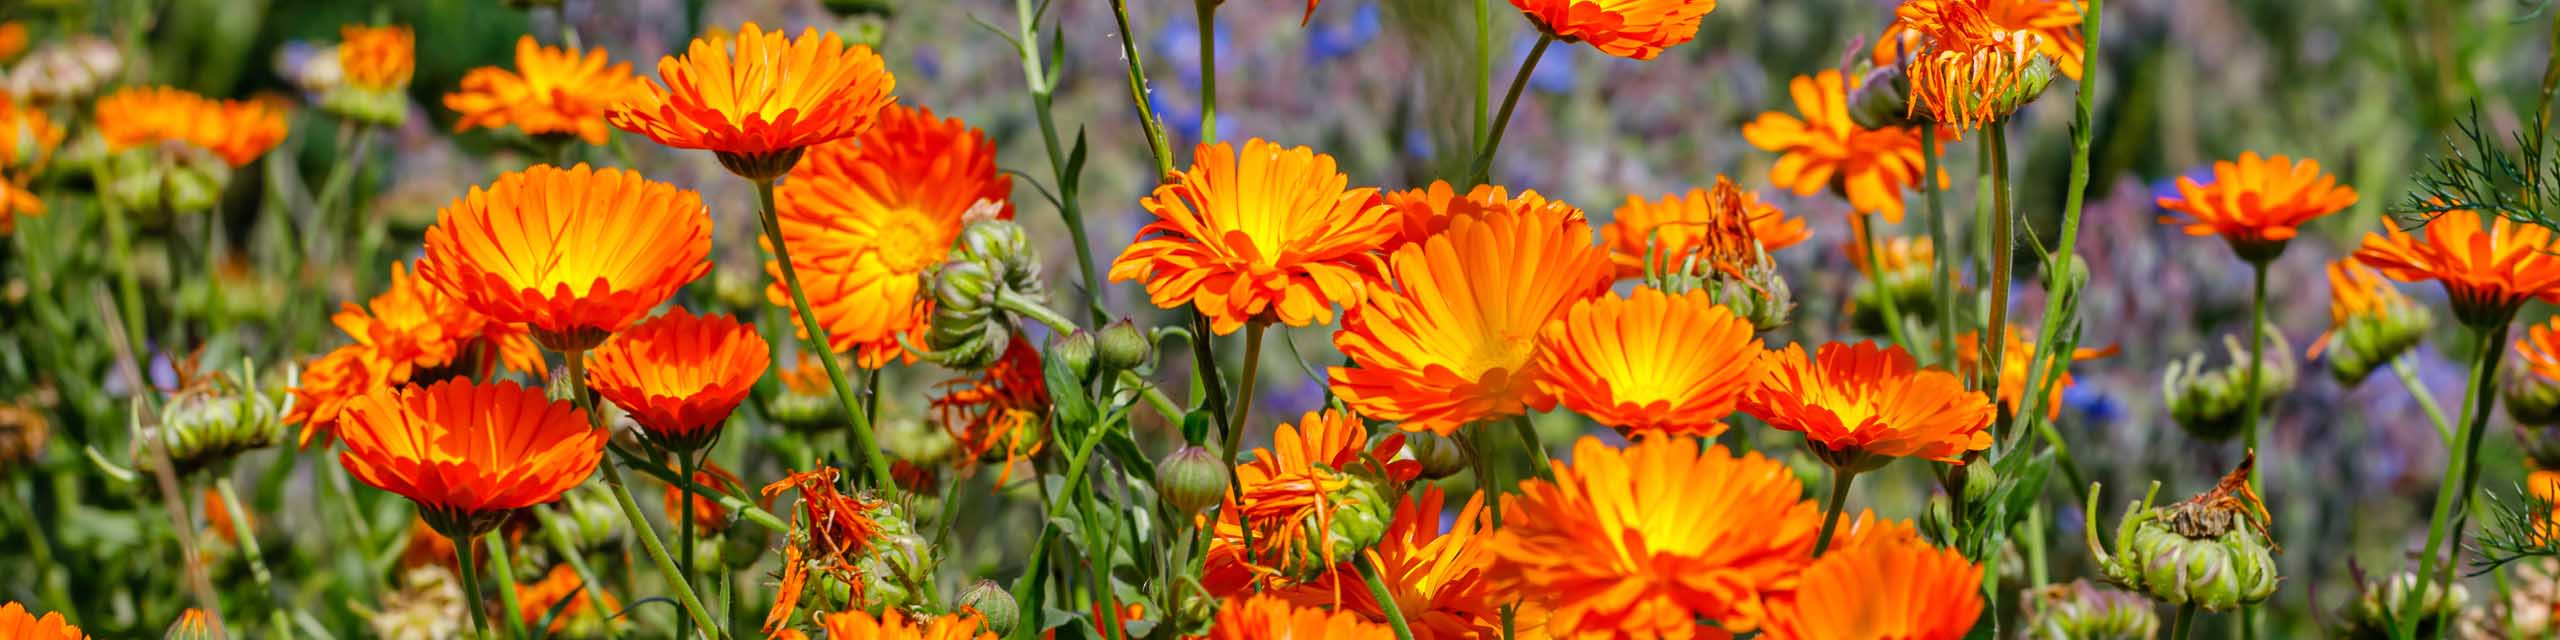 Orange and yellow calendula flowers in a cottage garden.